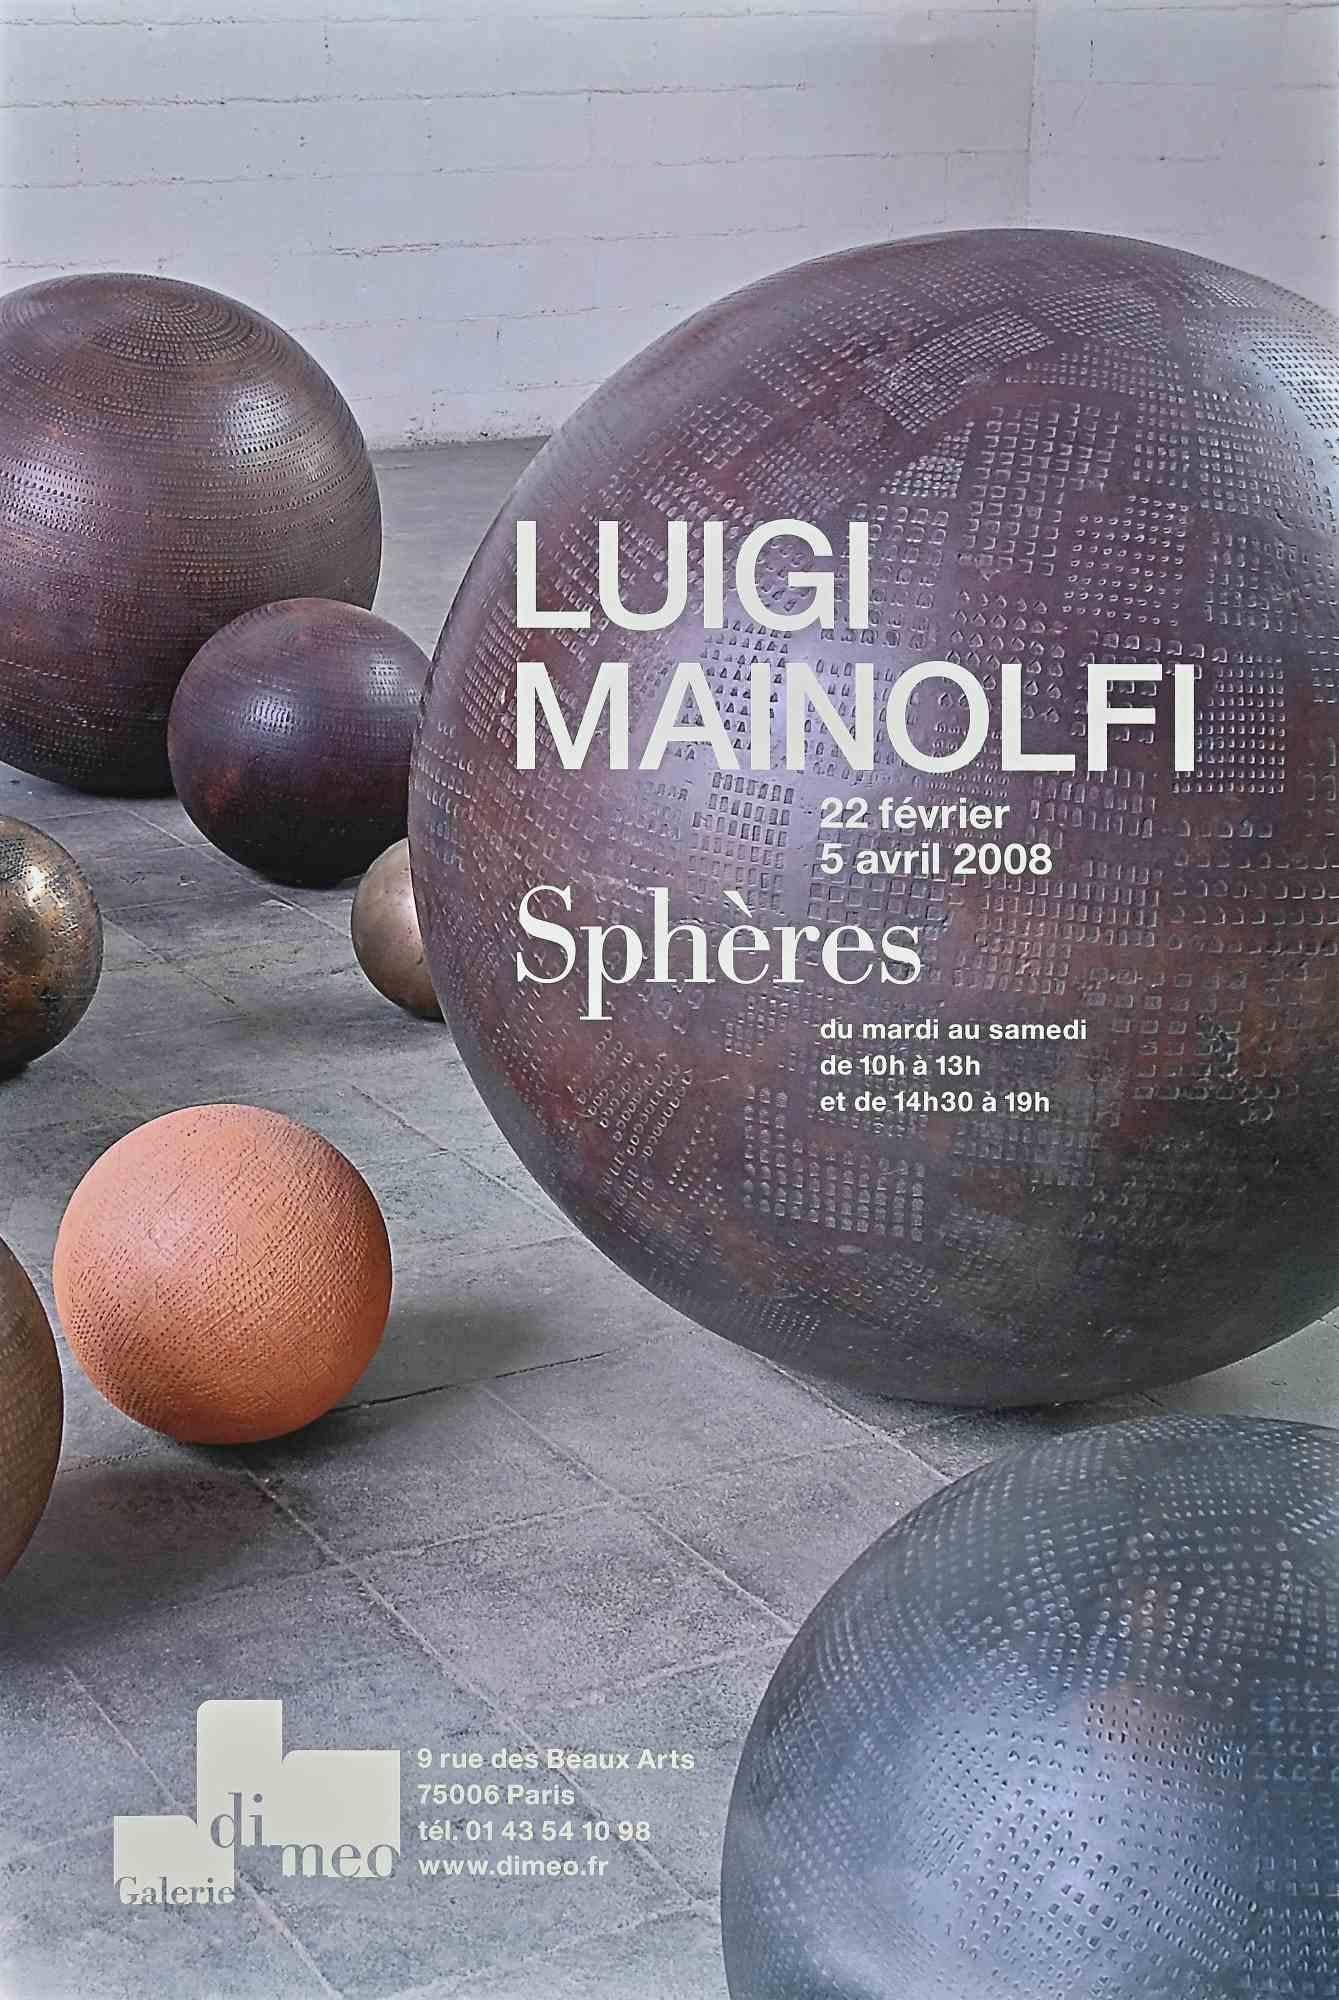 Vintage Poster is an offset realized for the exhibition of Luigi Mainolfi in 2008.

Good condition, no signature.

The exhibition is in Galerie Di Meo in Paris from February to april 2008.

Luigi Mainolfi After studying painting at the Academy of